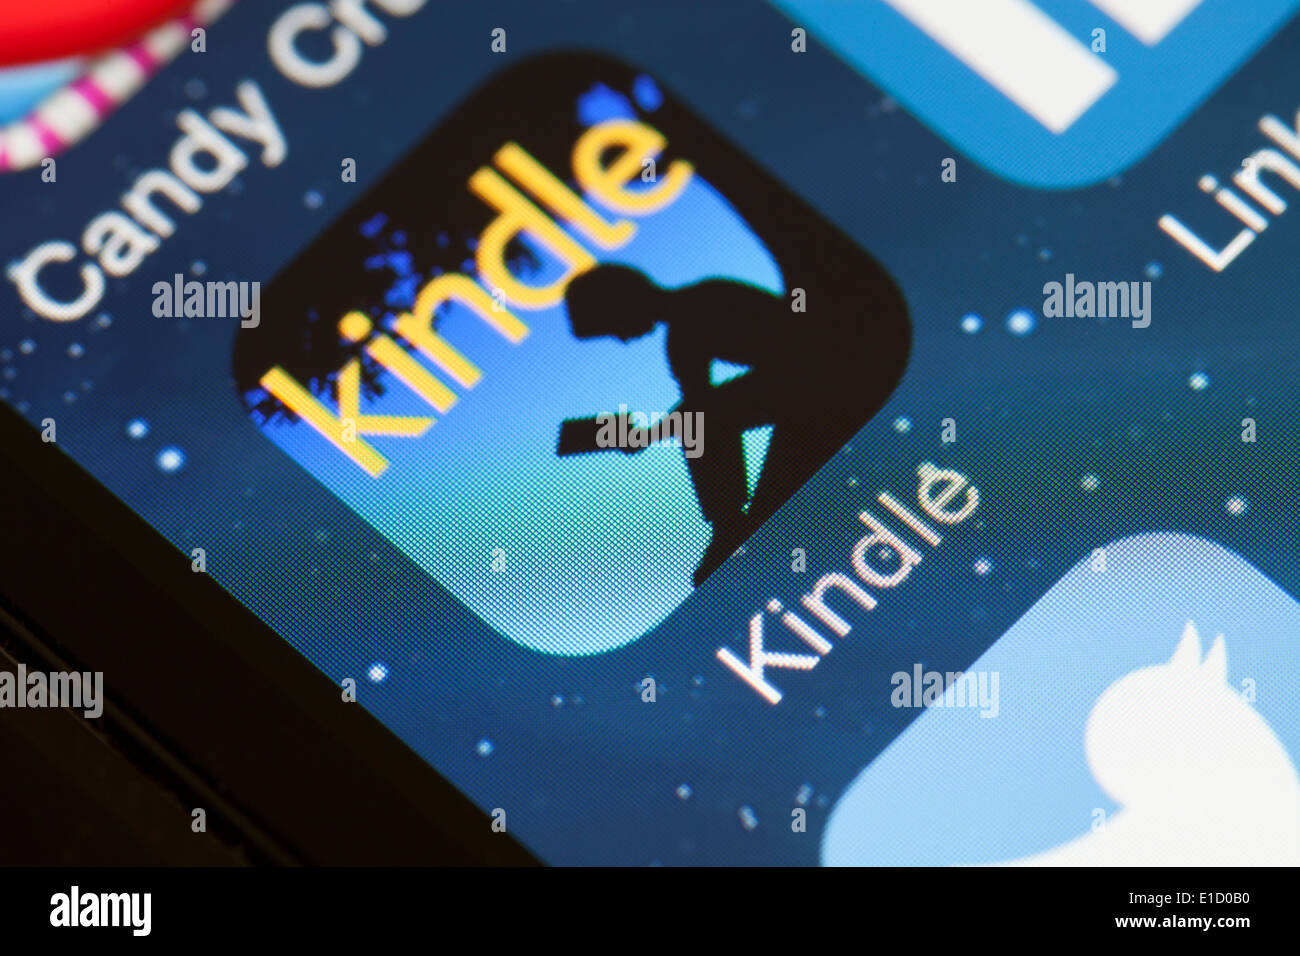 Kindle app icon on mobile phone. Stock Photo